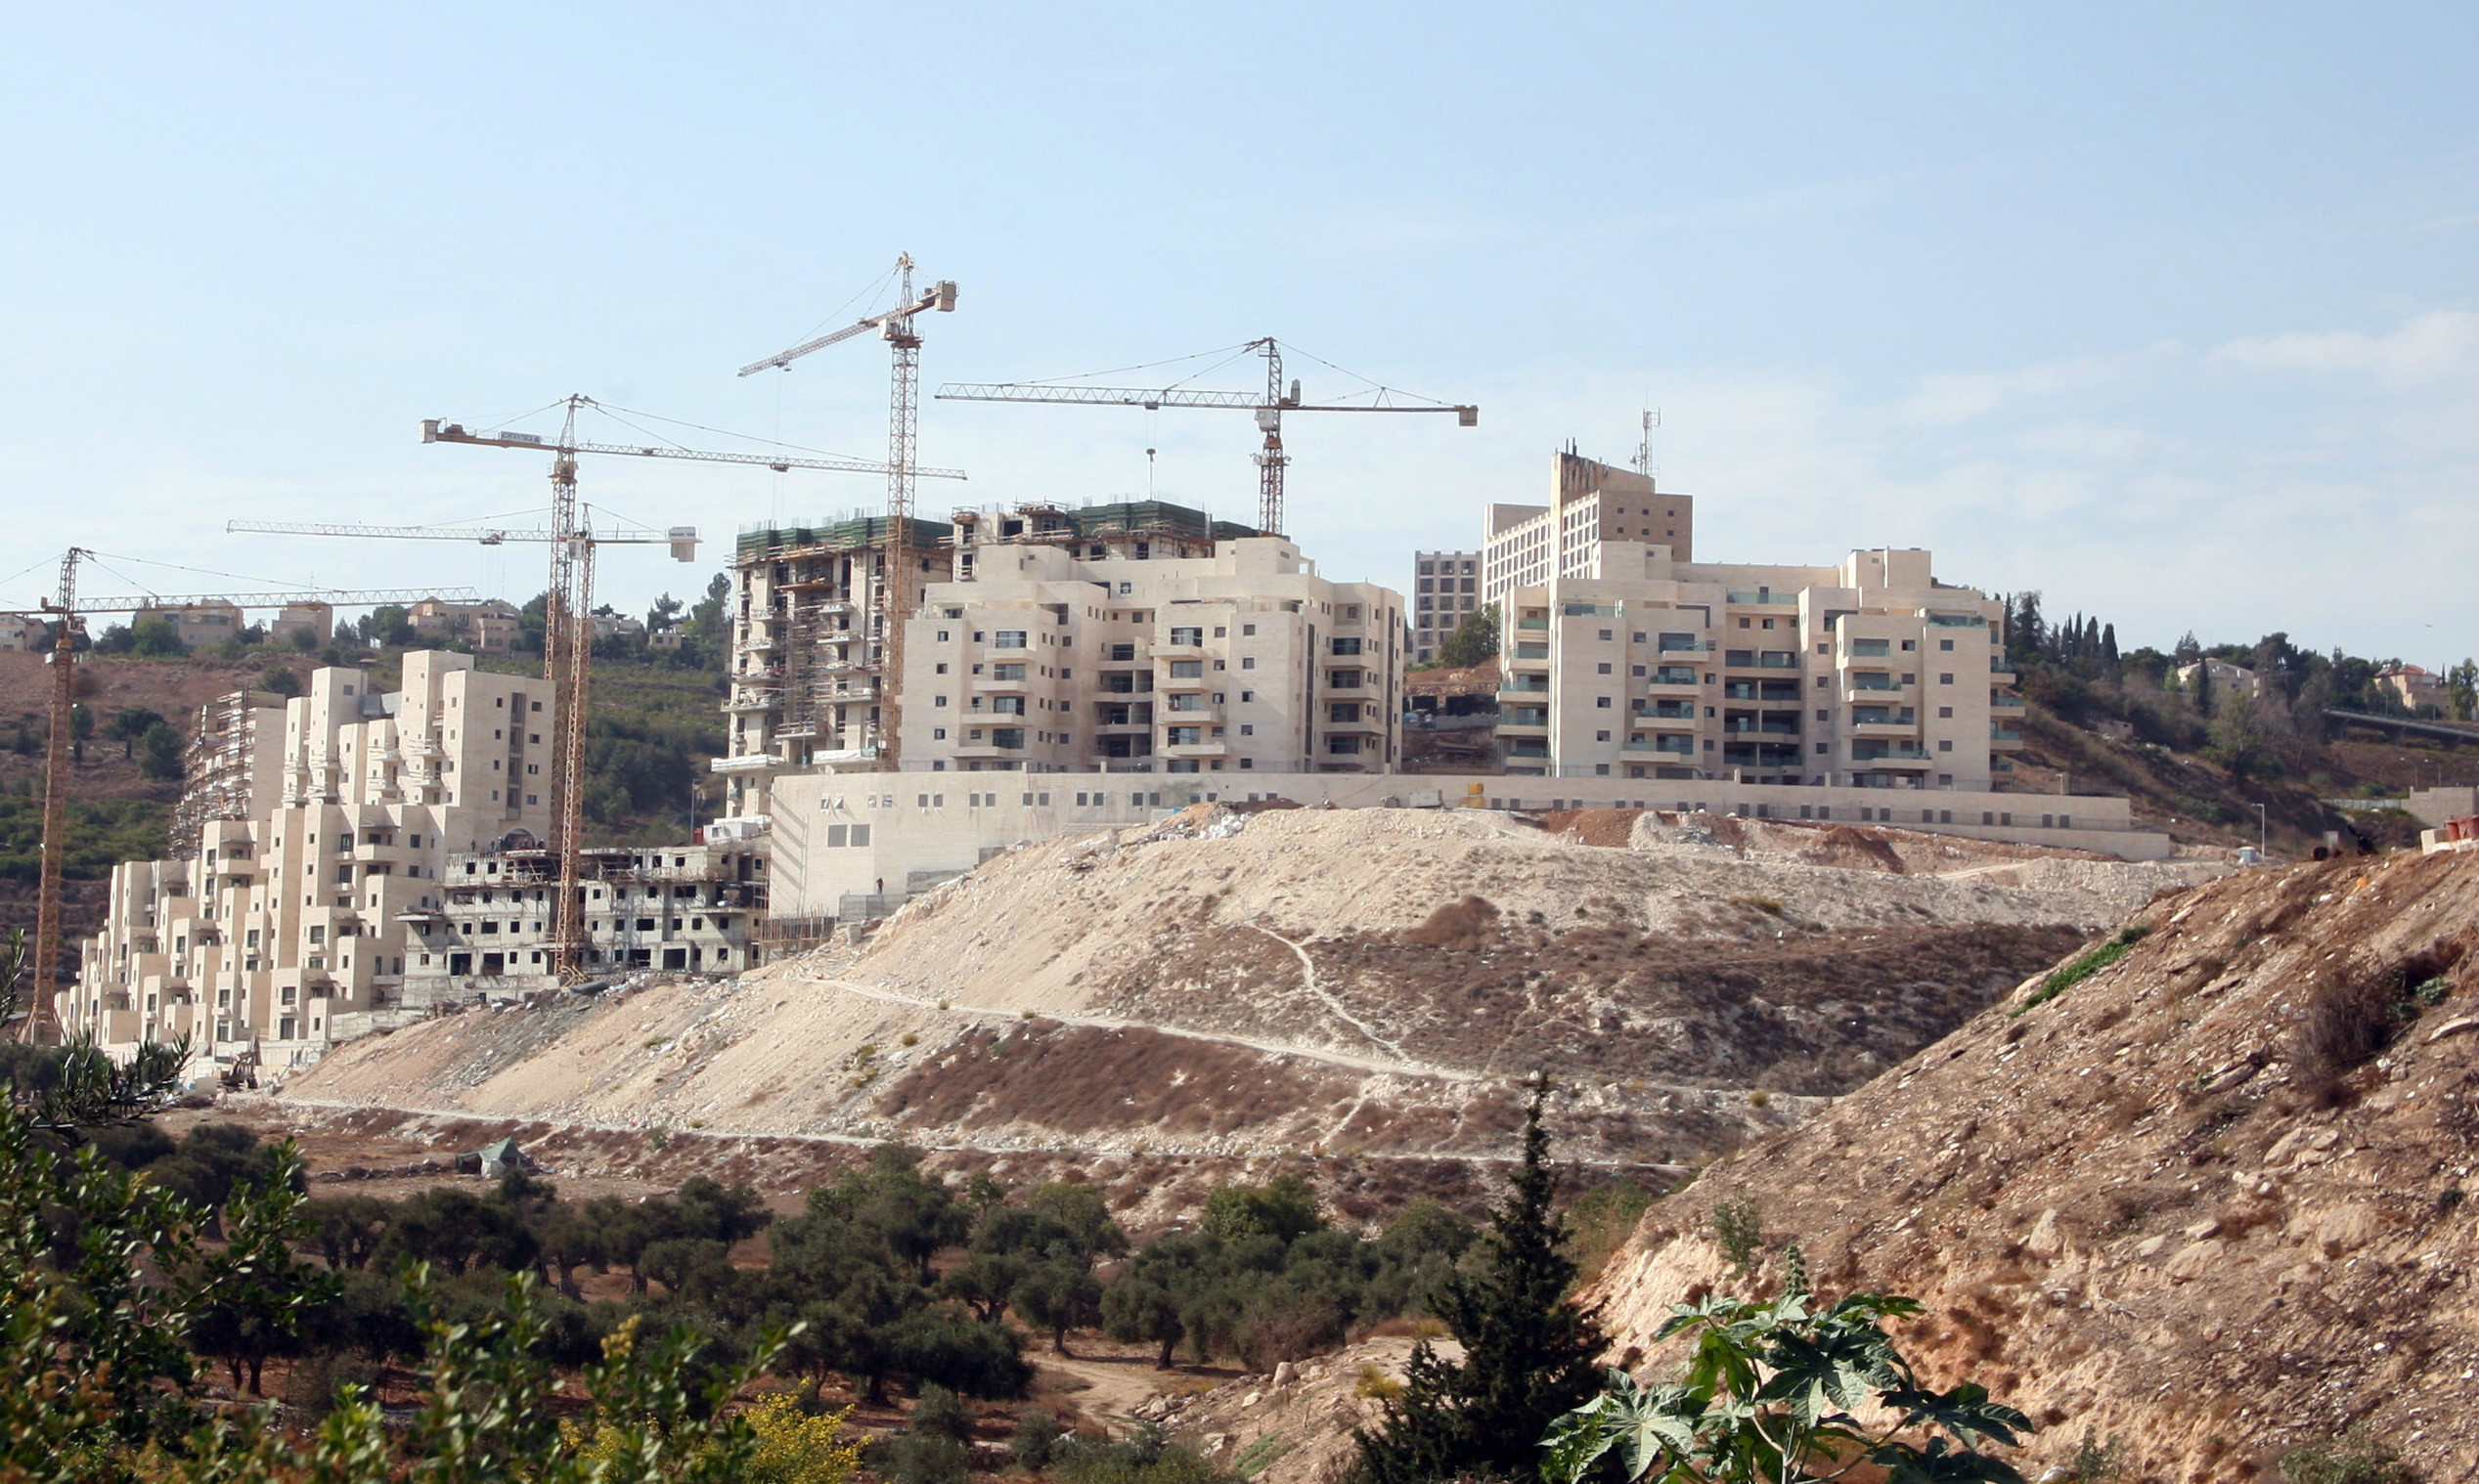 Israel’s President Joins Opposition to Law Legalizing Homes Built on Private Land